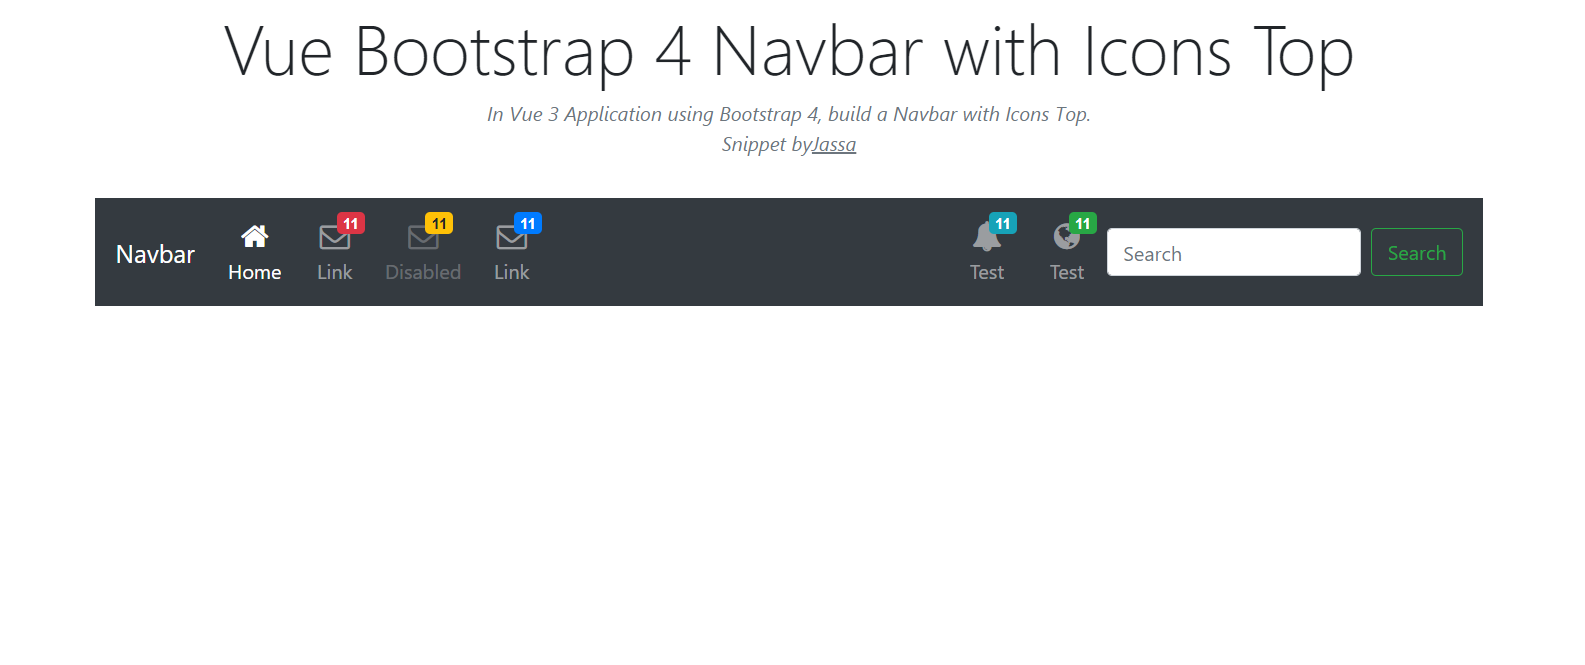 Vuejs Bootstrap 4 Navbar with Icons Top - Therichpost